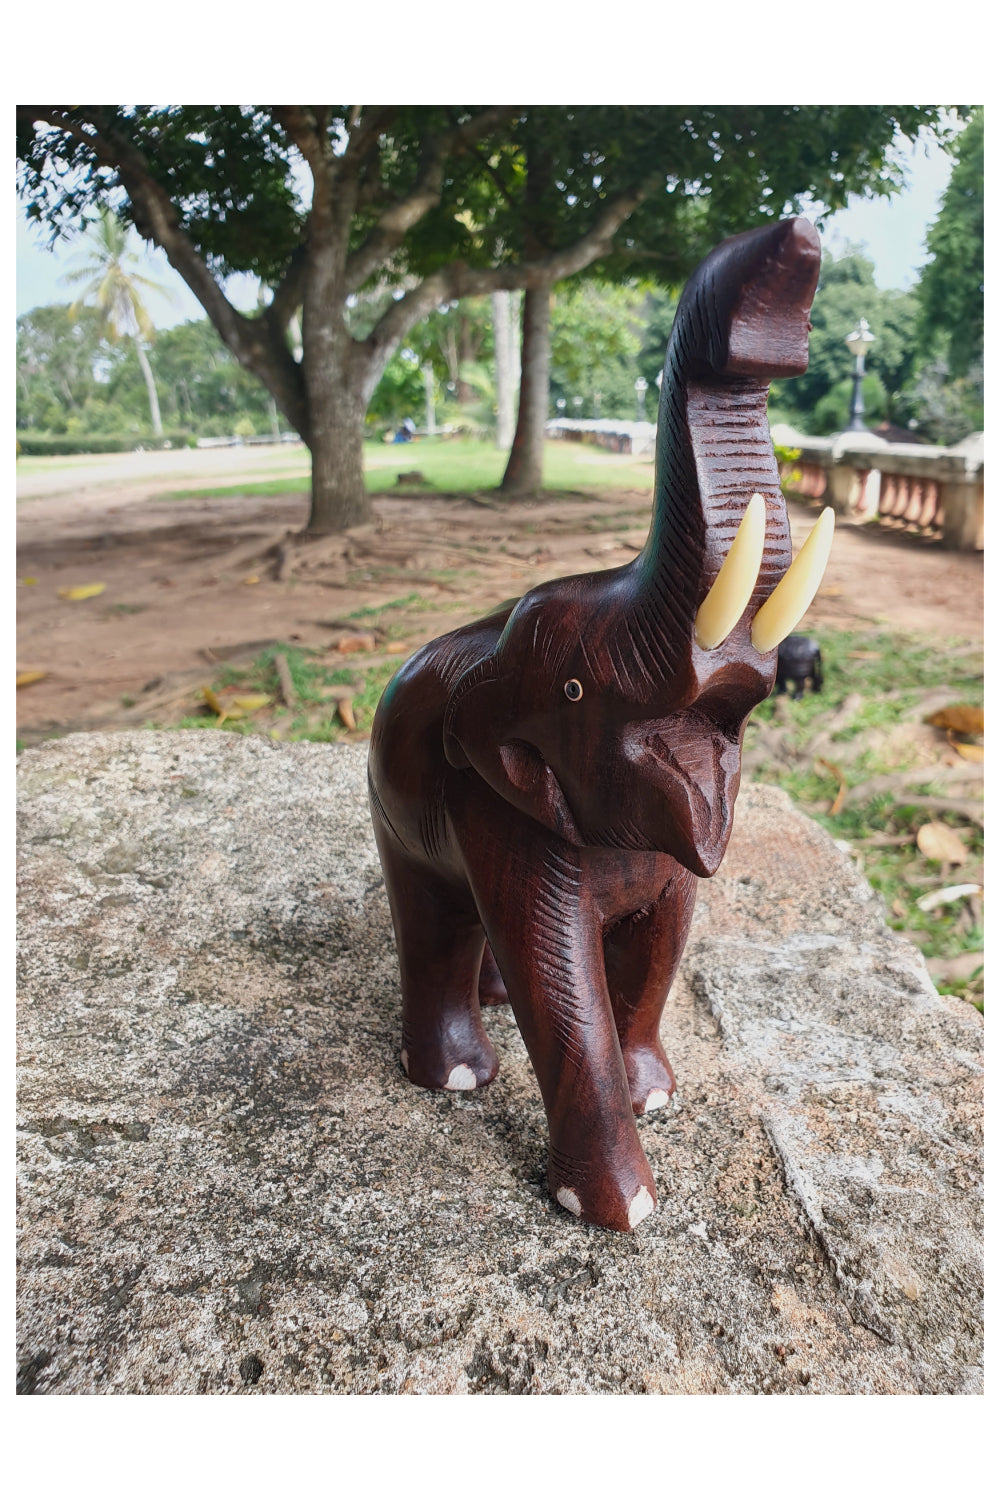 Southloom Handmade Trumpeting Elephant Handicraft (Carved from Rose Wood) 8 Inches